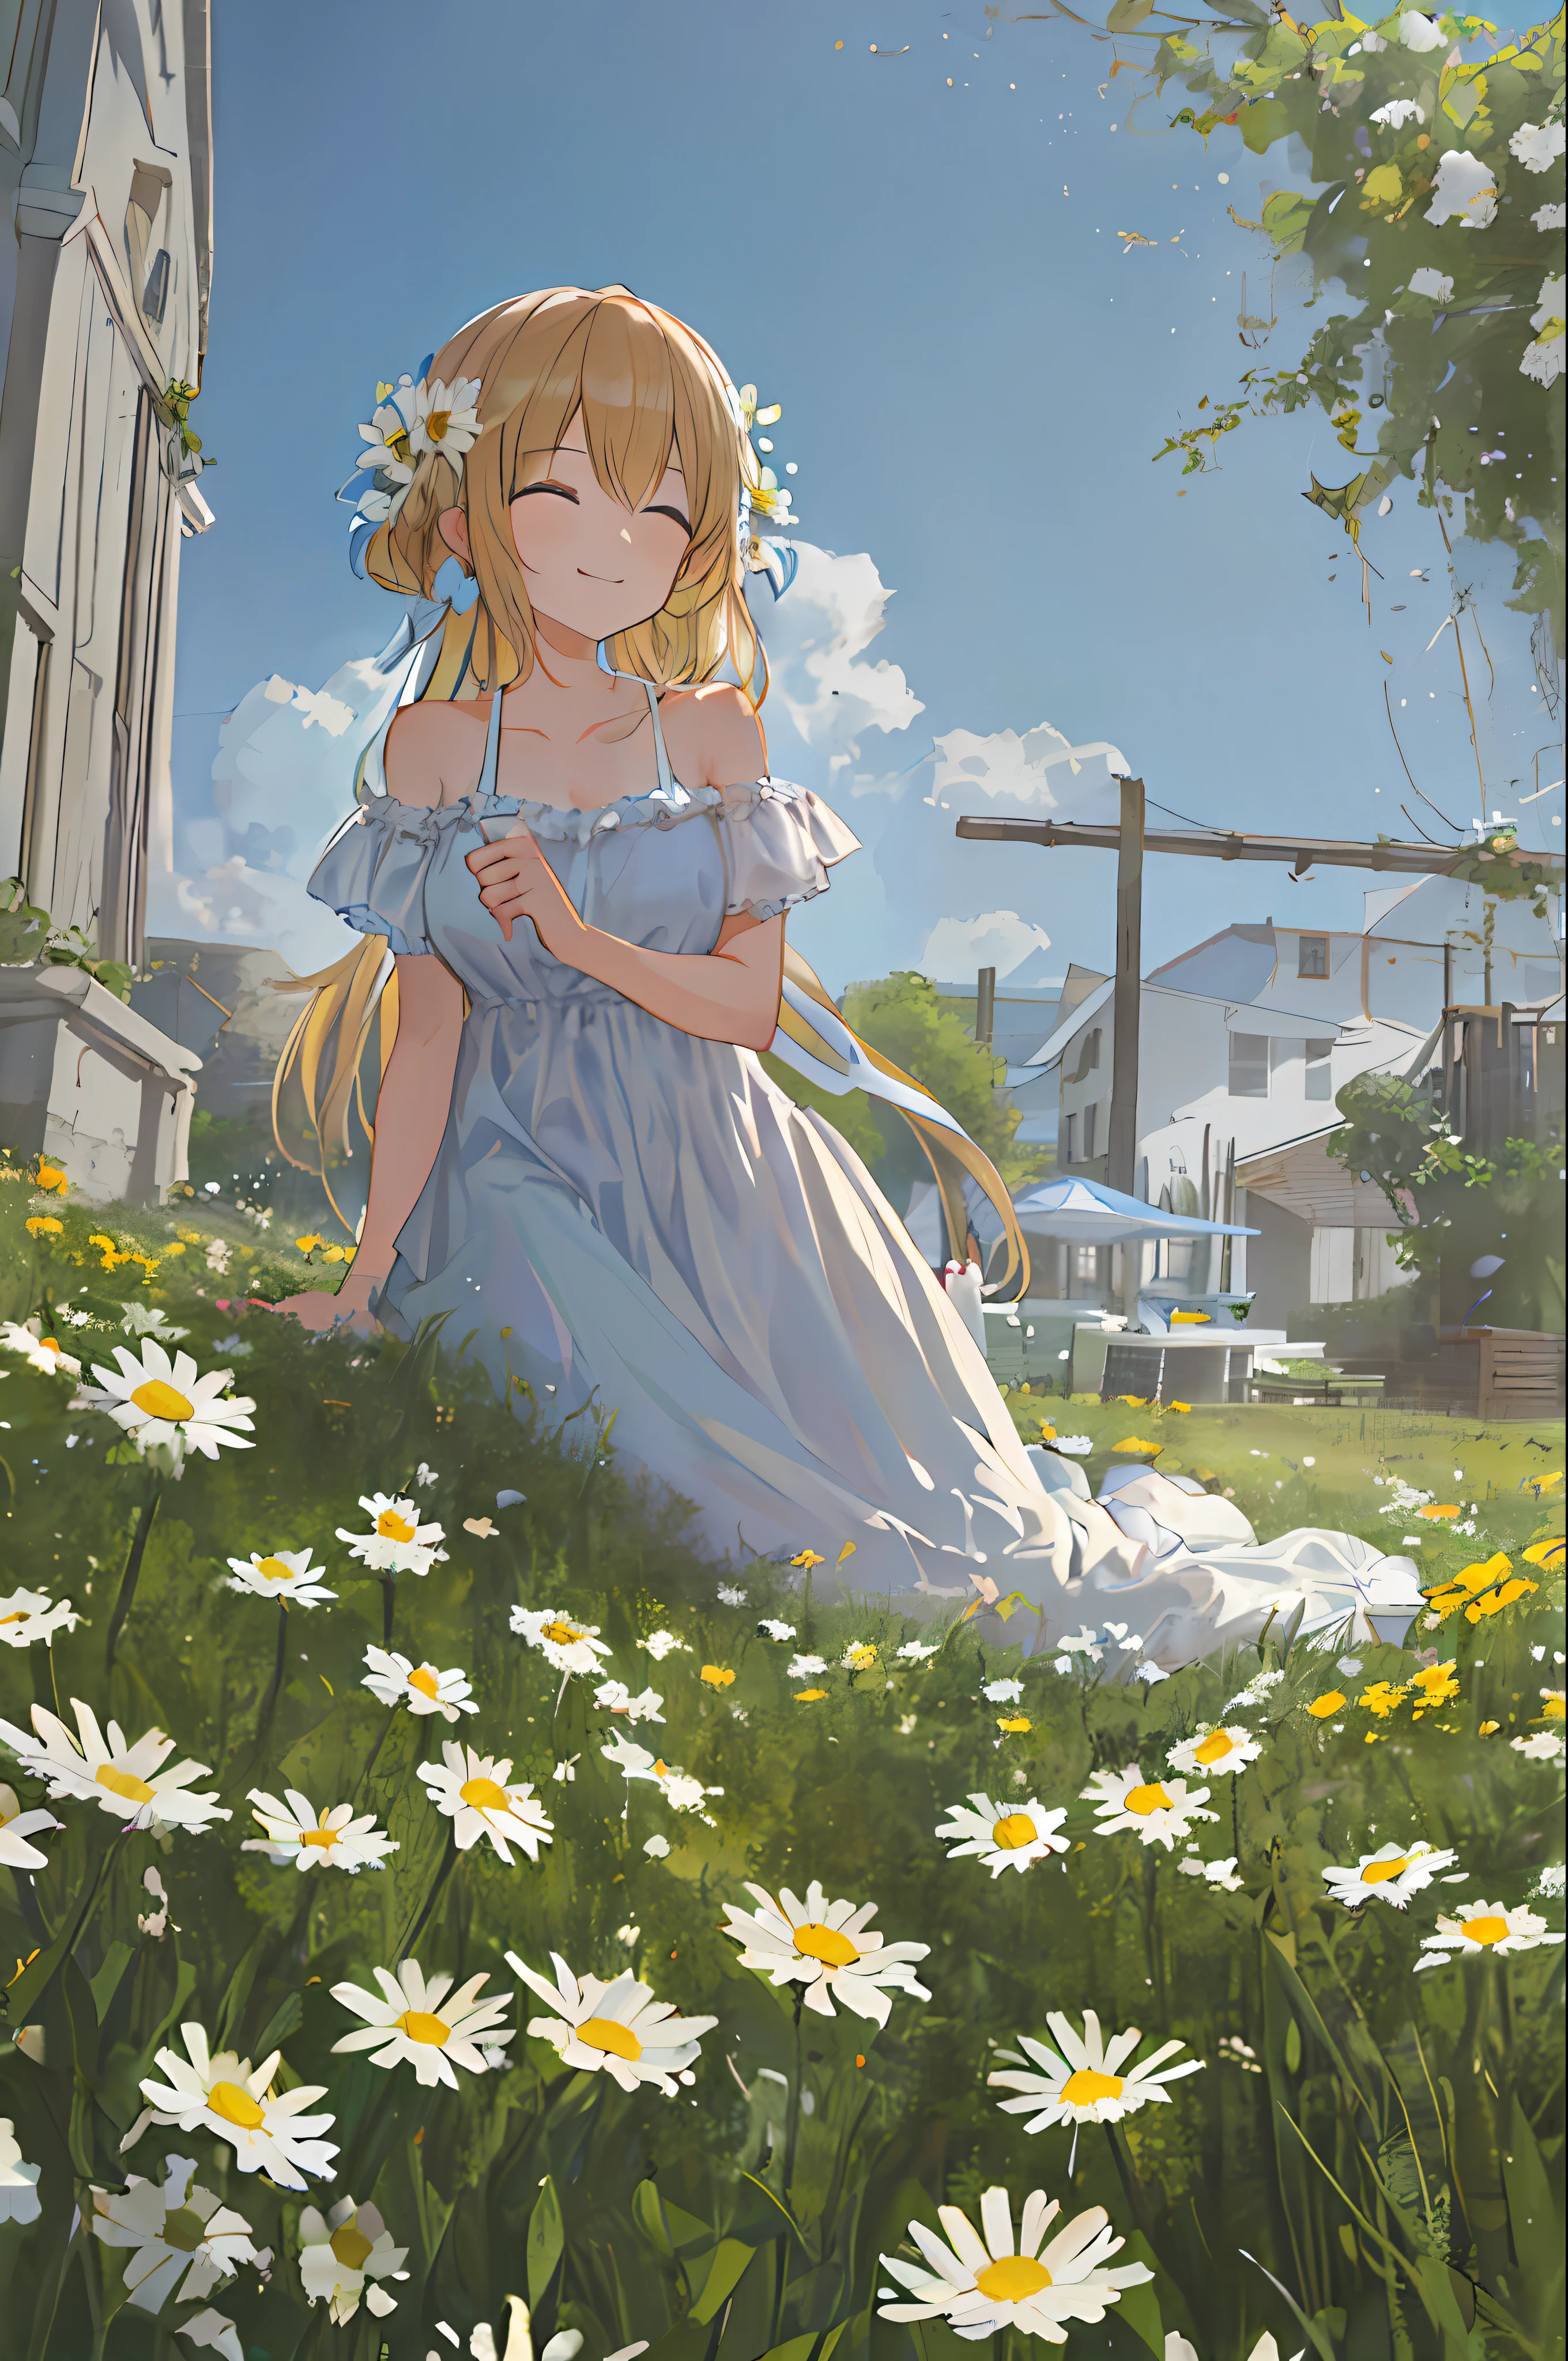 Masterpiece-grade CG, best image quality and detail, photo-level realism (1.4). (1girl), wearing a white dress, slightly exposed shoulders, delicate and shiny skin, smiling, in the garden, surrounded by yellow daisies, slightly raised head to look up at the bright sky, the picture adopts artistic thick painting style, softer luminosity, 4K HD wallpaper, better volumetric cloud effect.